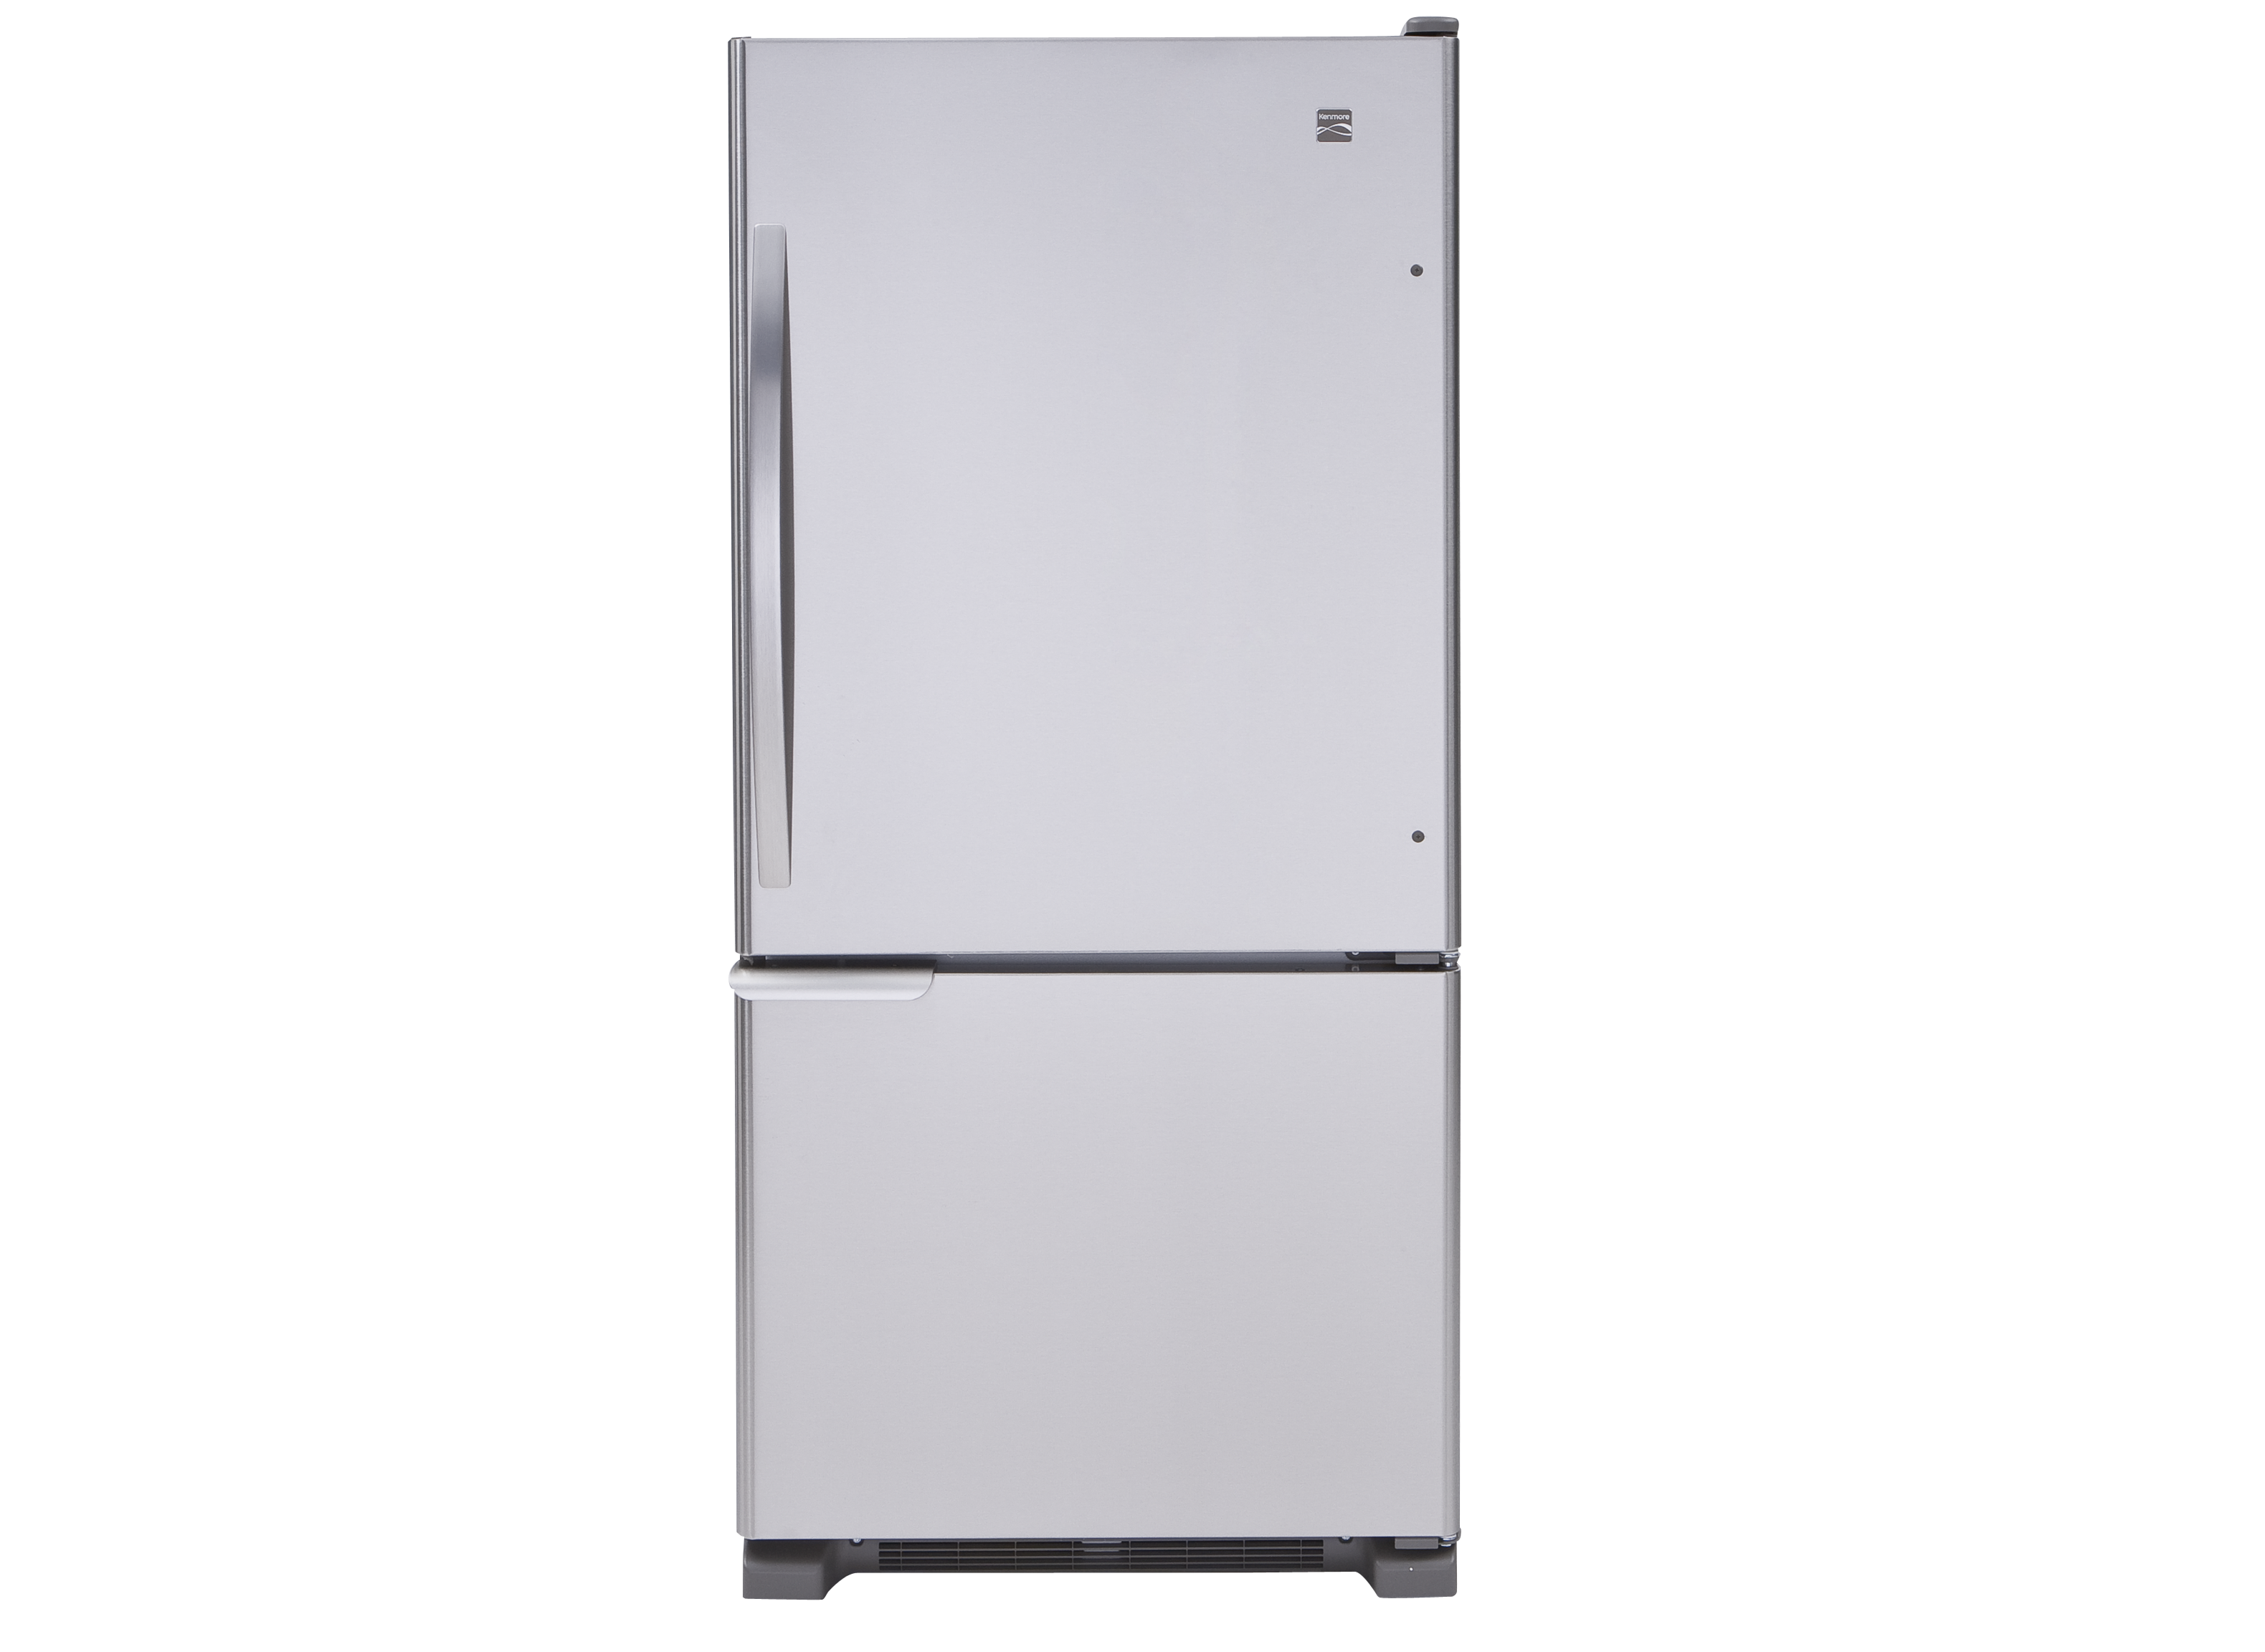 Kenmore 69313 Refrigerator Review - Consumer Reports